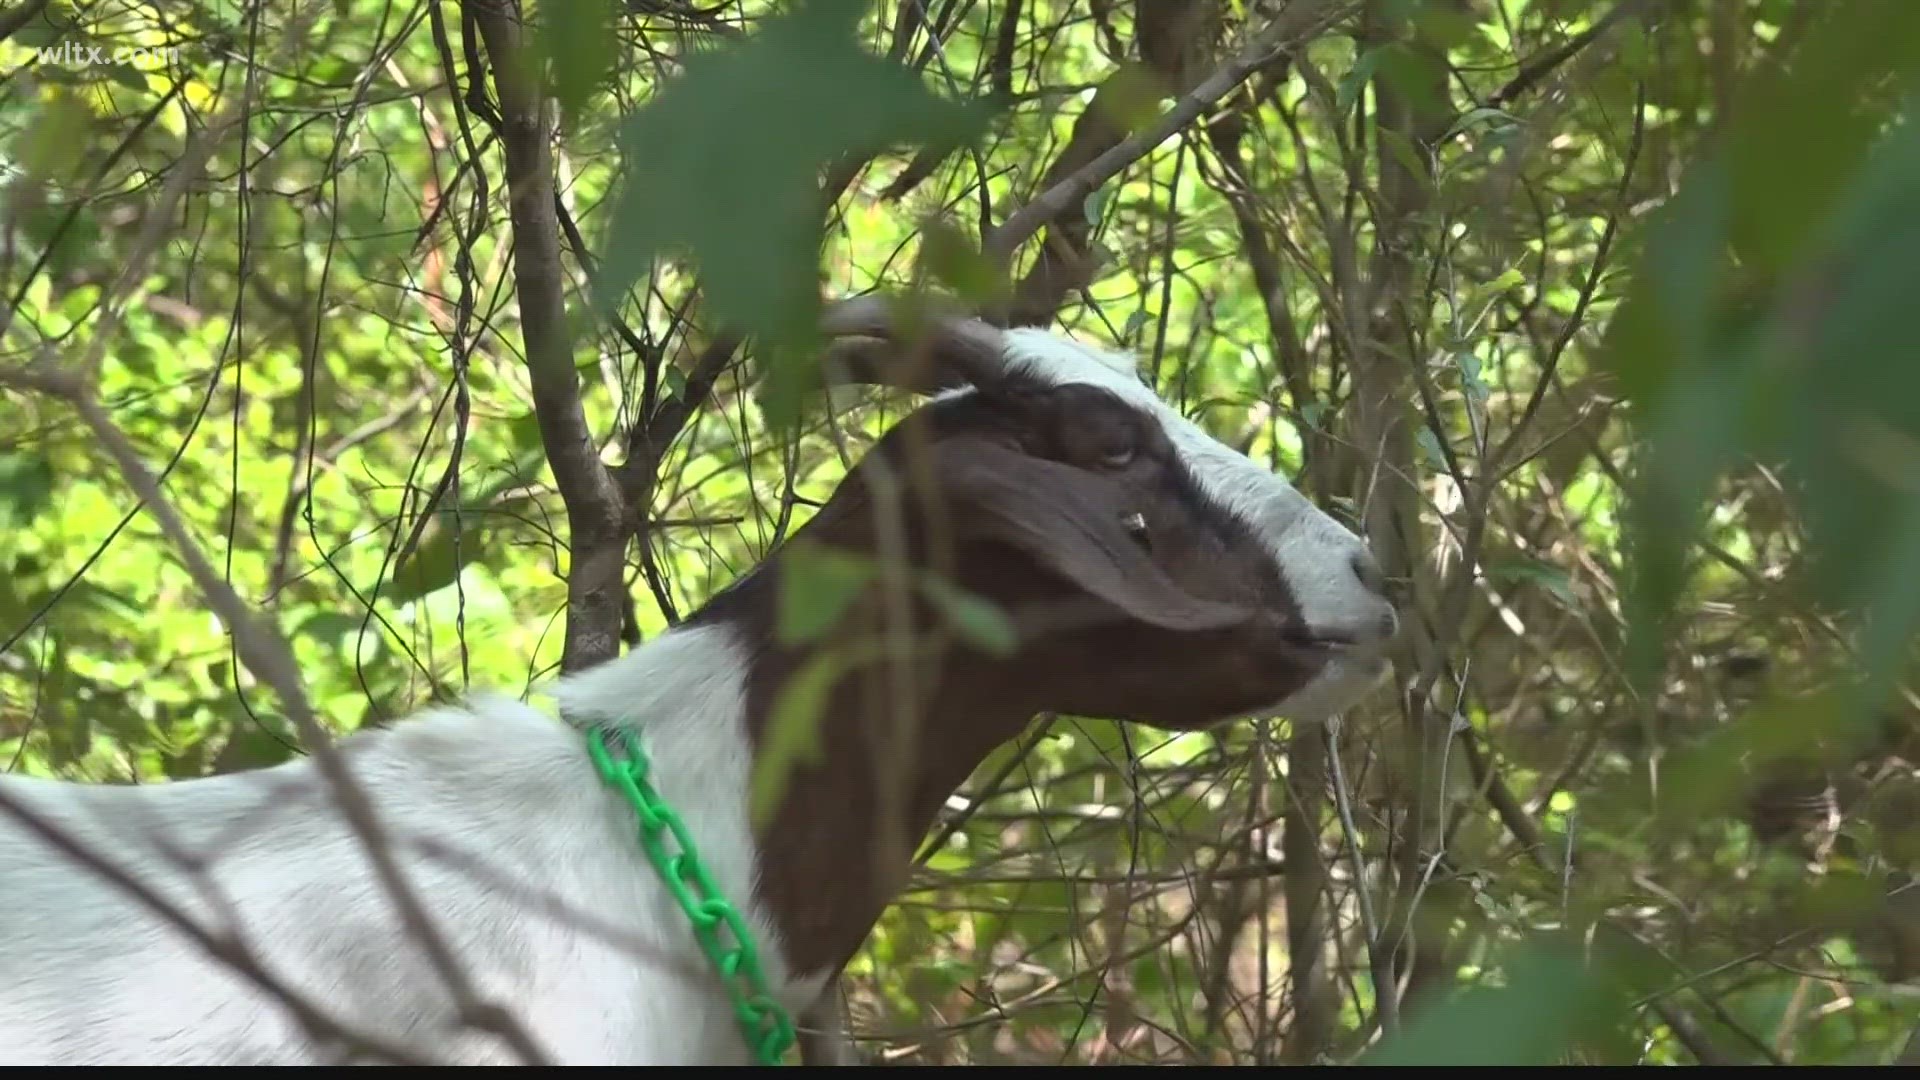 Some companies use goats to help maintain vegetation at city council "goatscaping" in the Capital City.